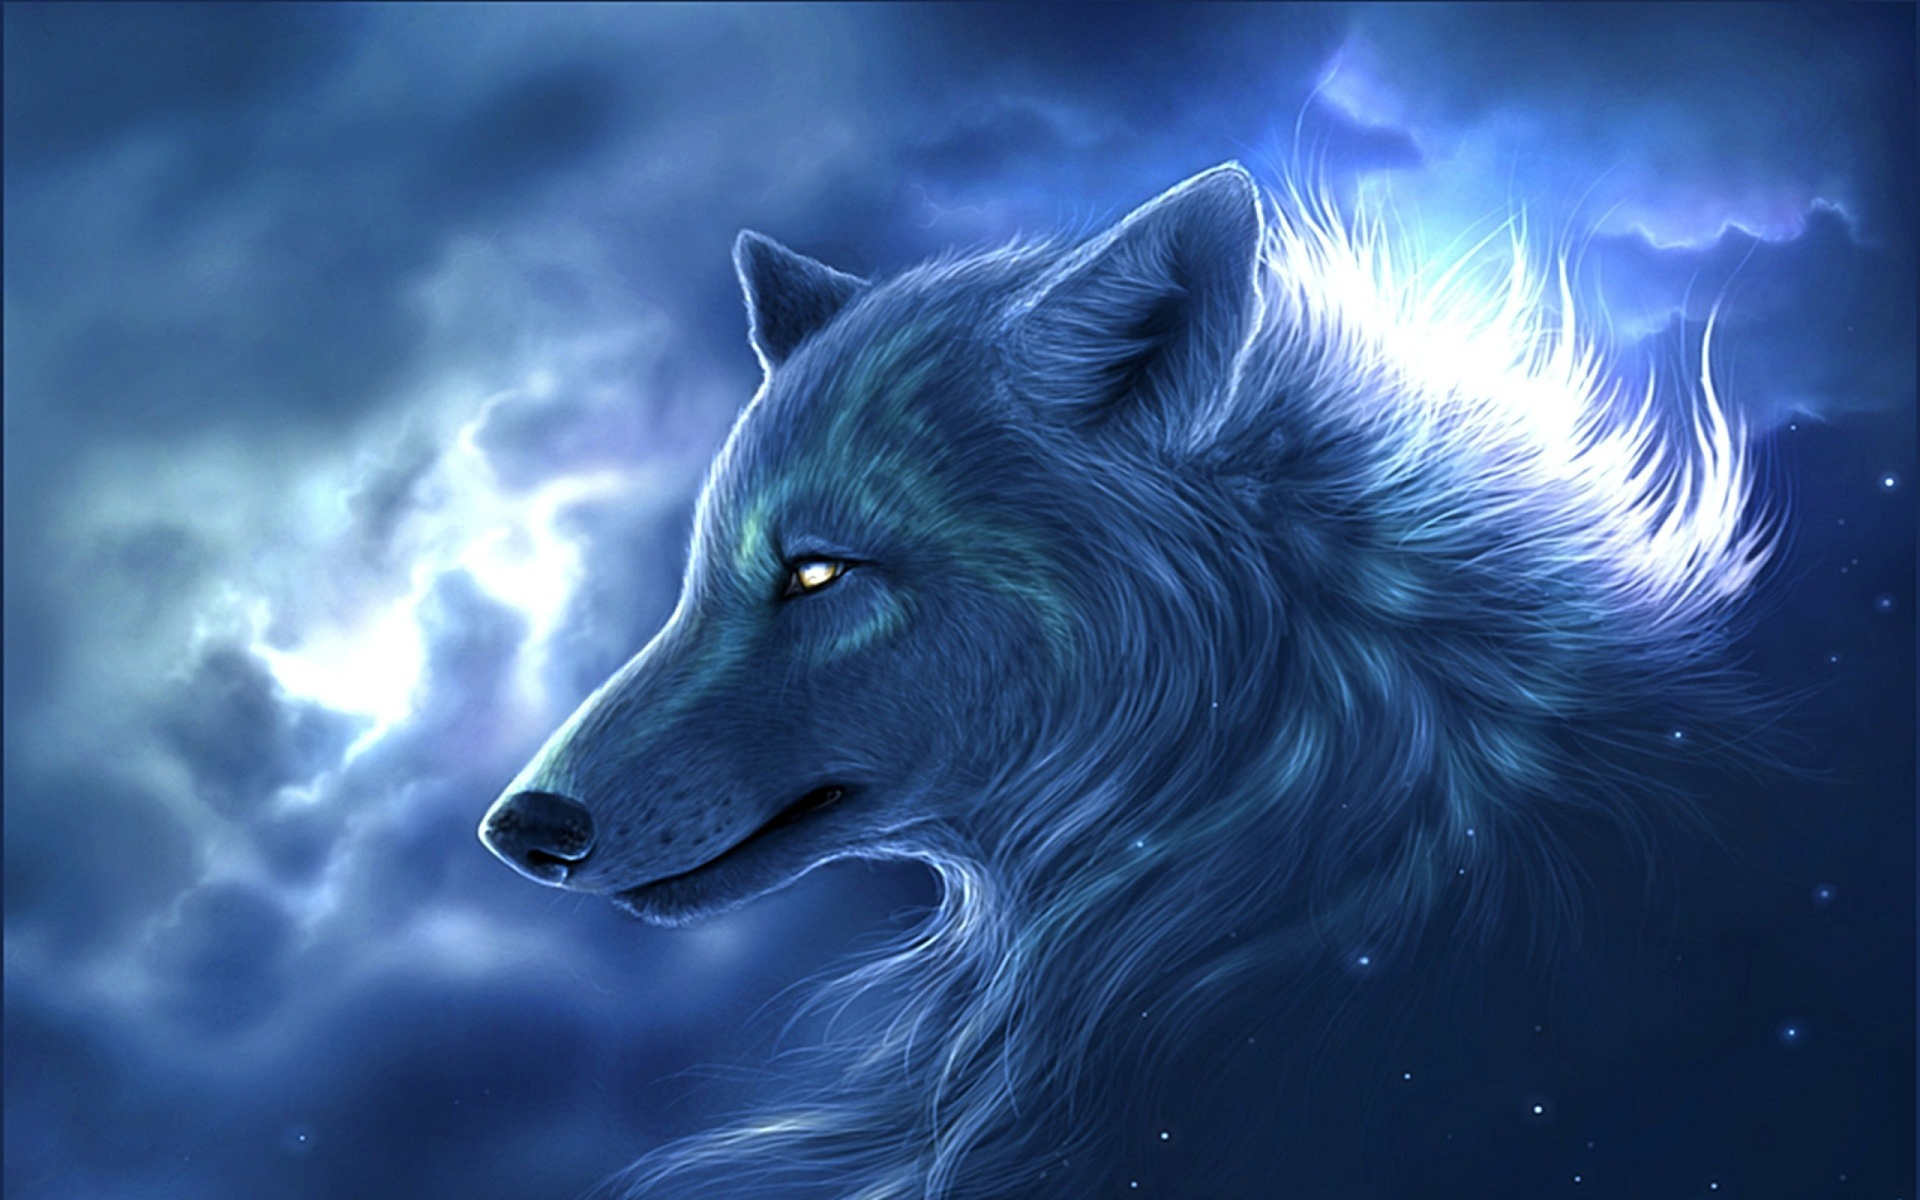 1920x1200 Free download fantasy art wolf animal hd wallpaper HD Wallpapers [] for your Desktop, Mobile \u0026 Tablet | Explore 45+ Wolf Wallpaper | Wolf Wallpapers and Screensavers, Wolf Images Free Wallpaper, Tribal Wolf Wallpaper